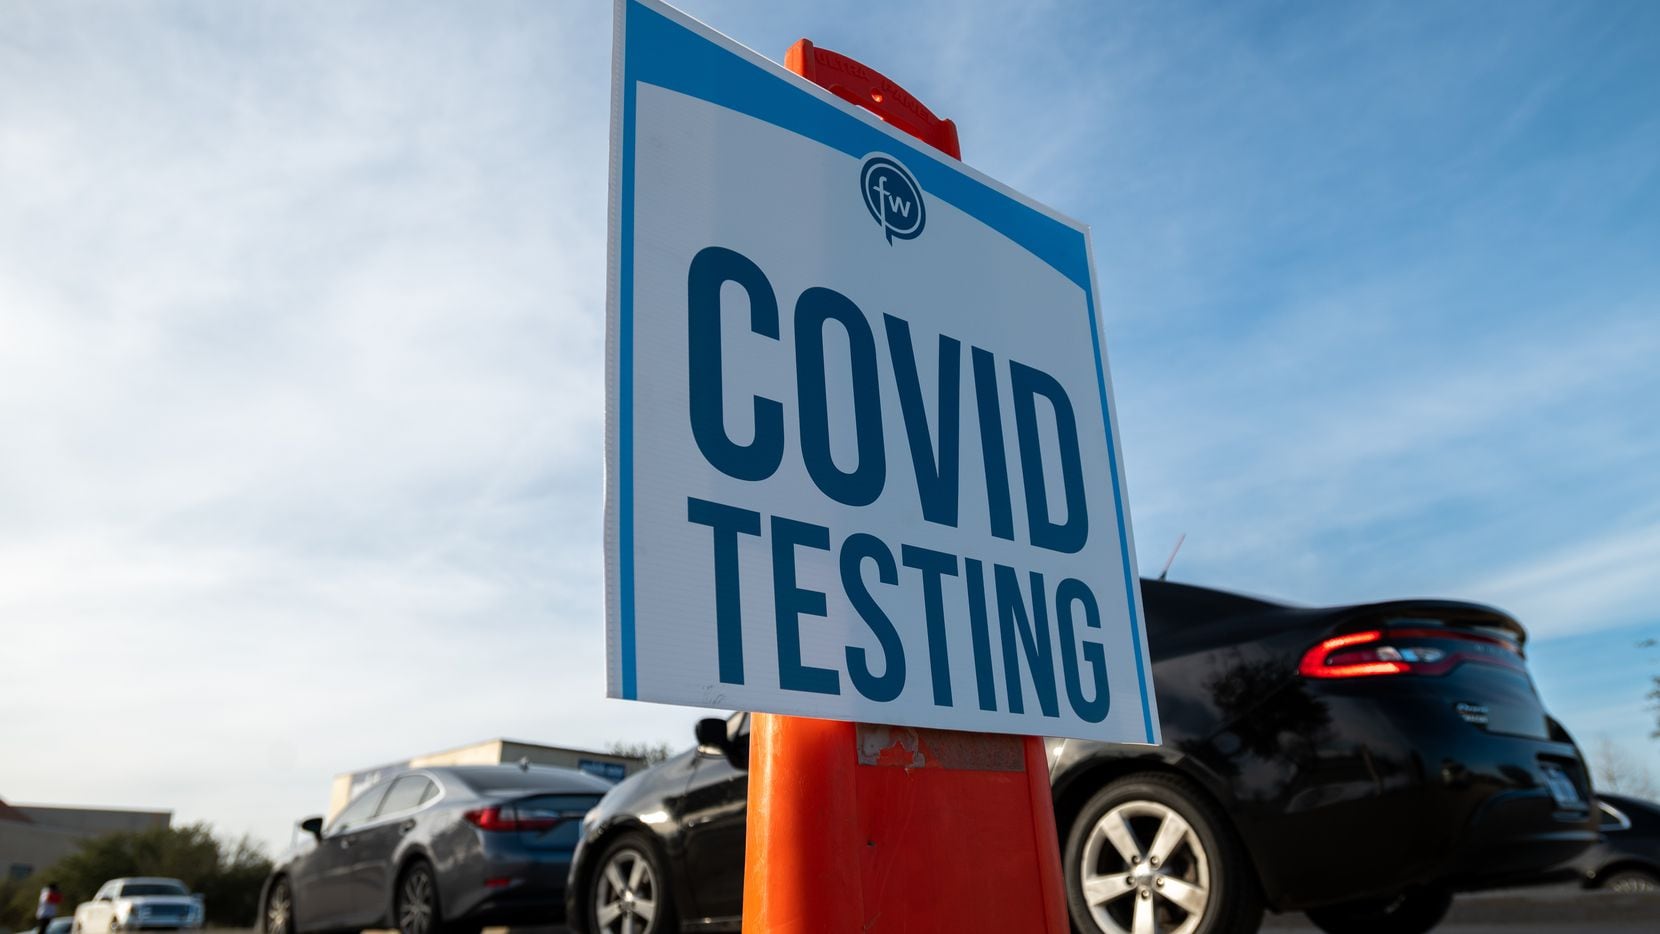 Signage is on display as motorists wait for a COVID-19 test in the parking lot of ...